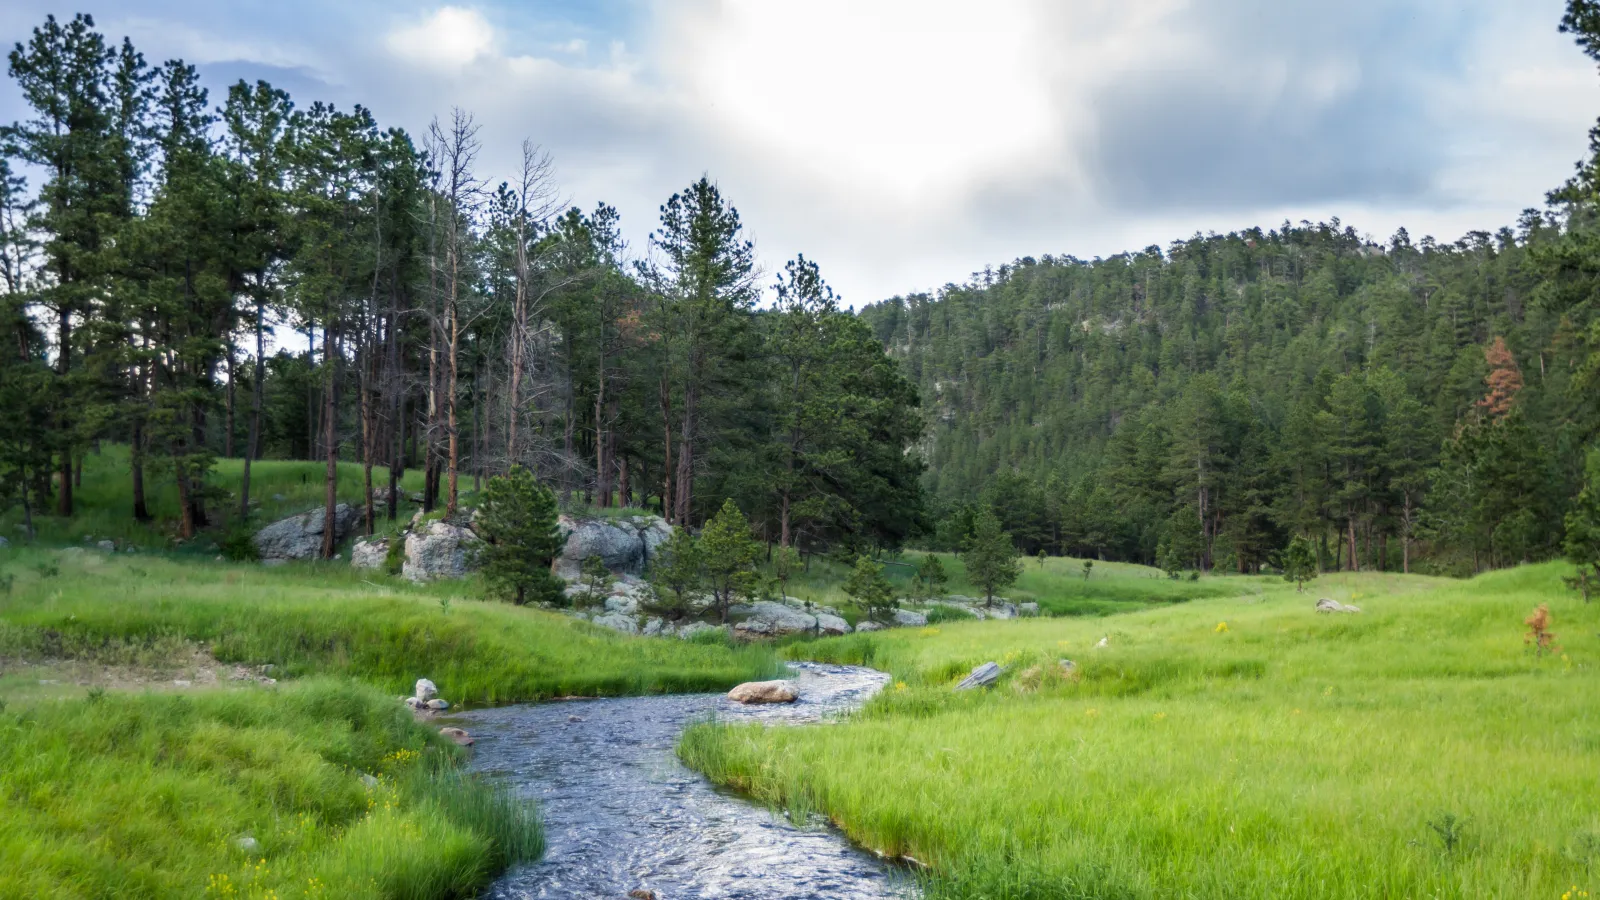 a stream running through a grassy area with trees and rocks in the background